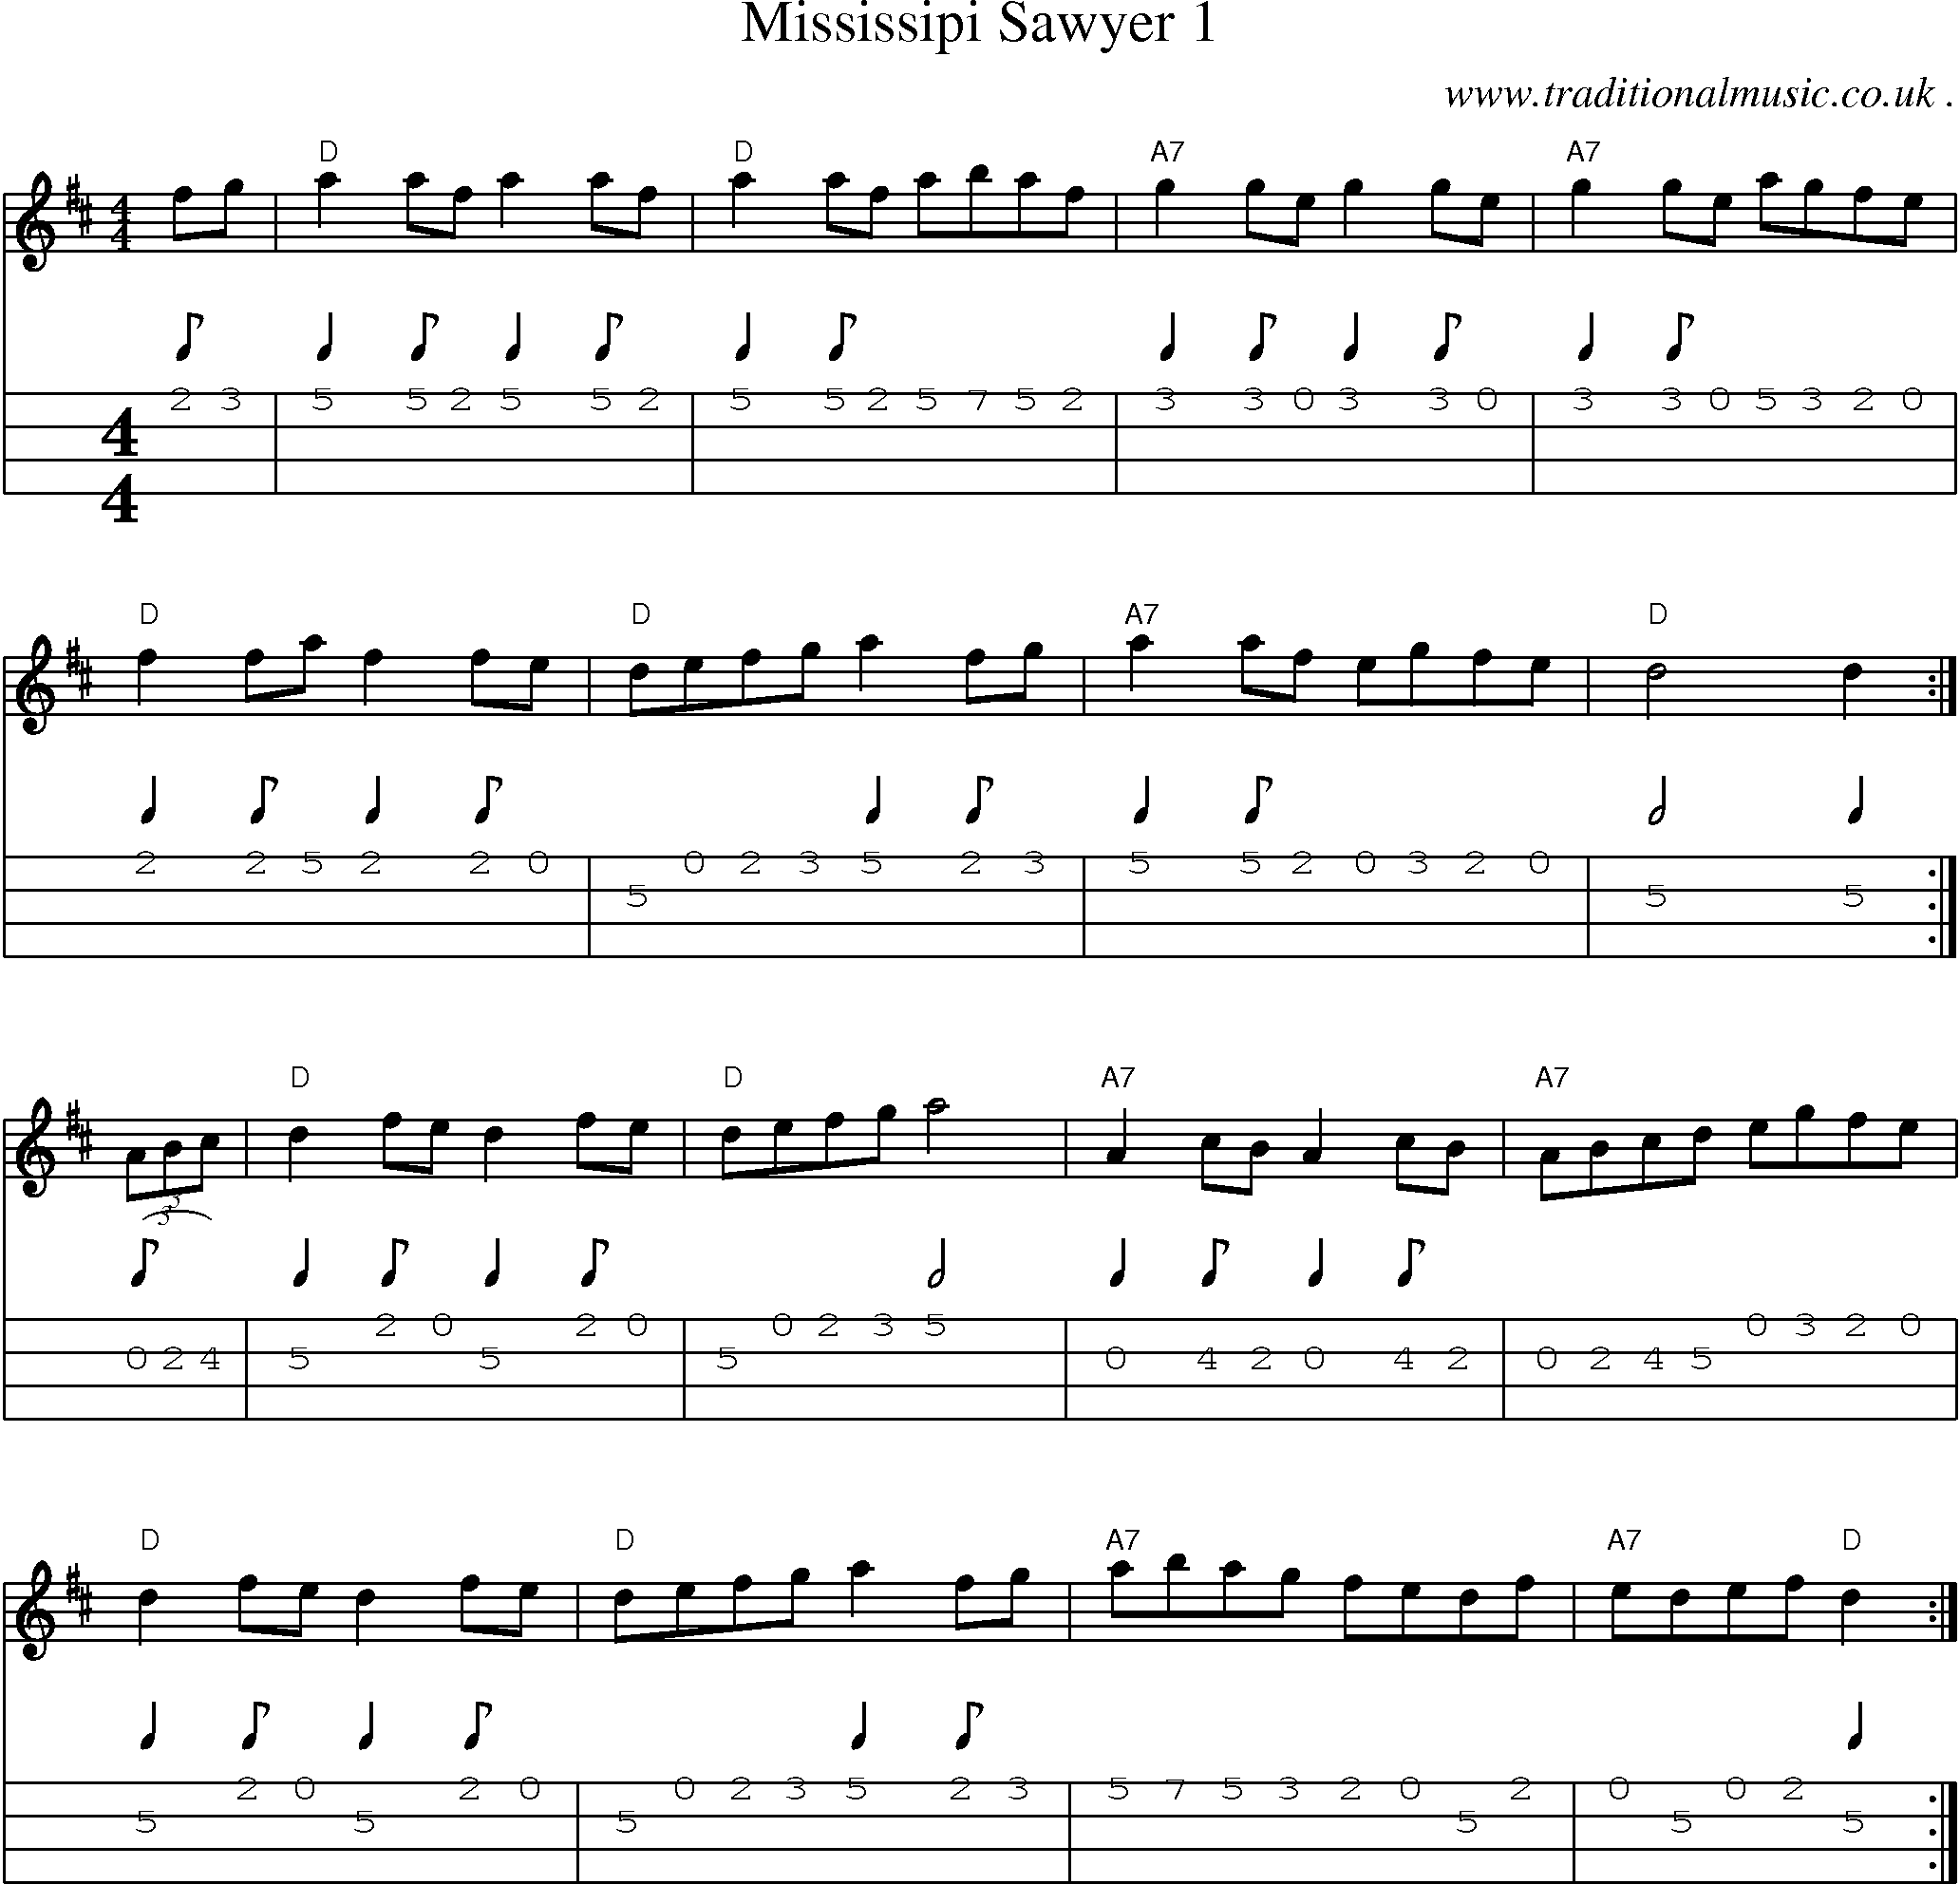 Music Score and Mandolin Tabs for Mississipi Sawyer 1